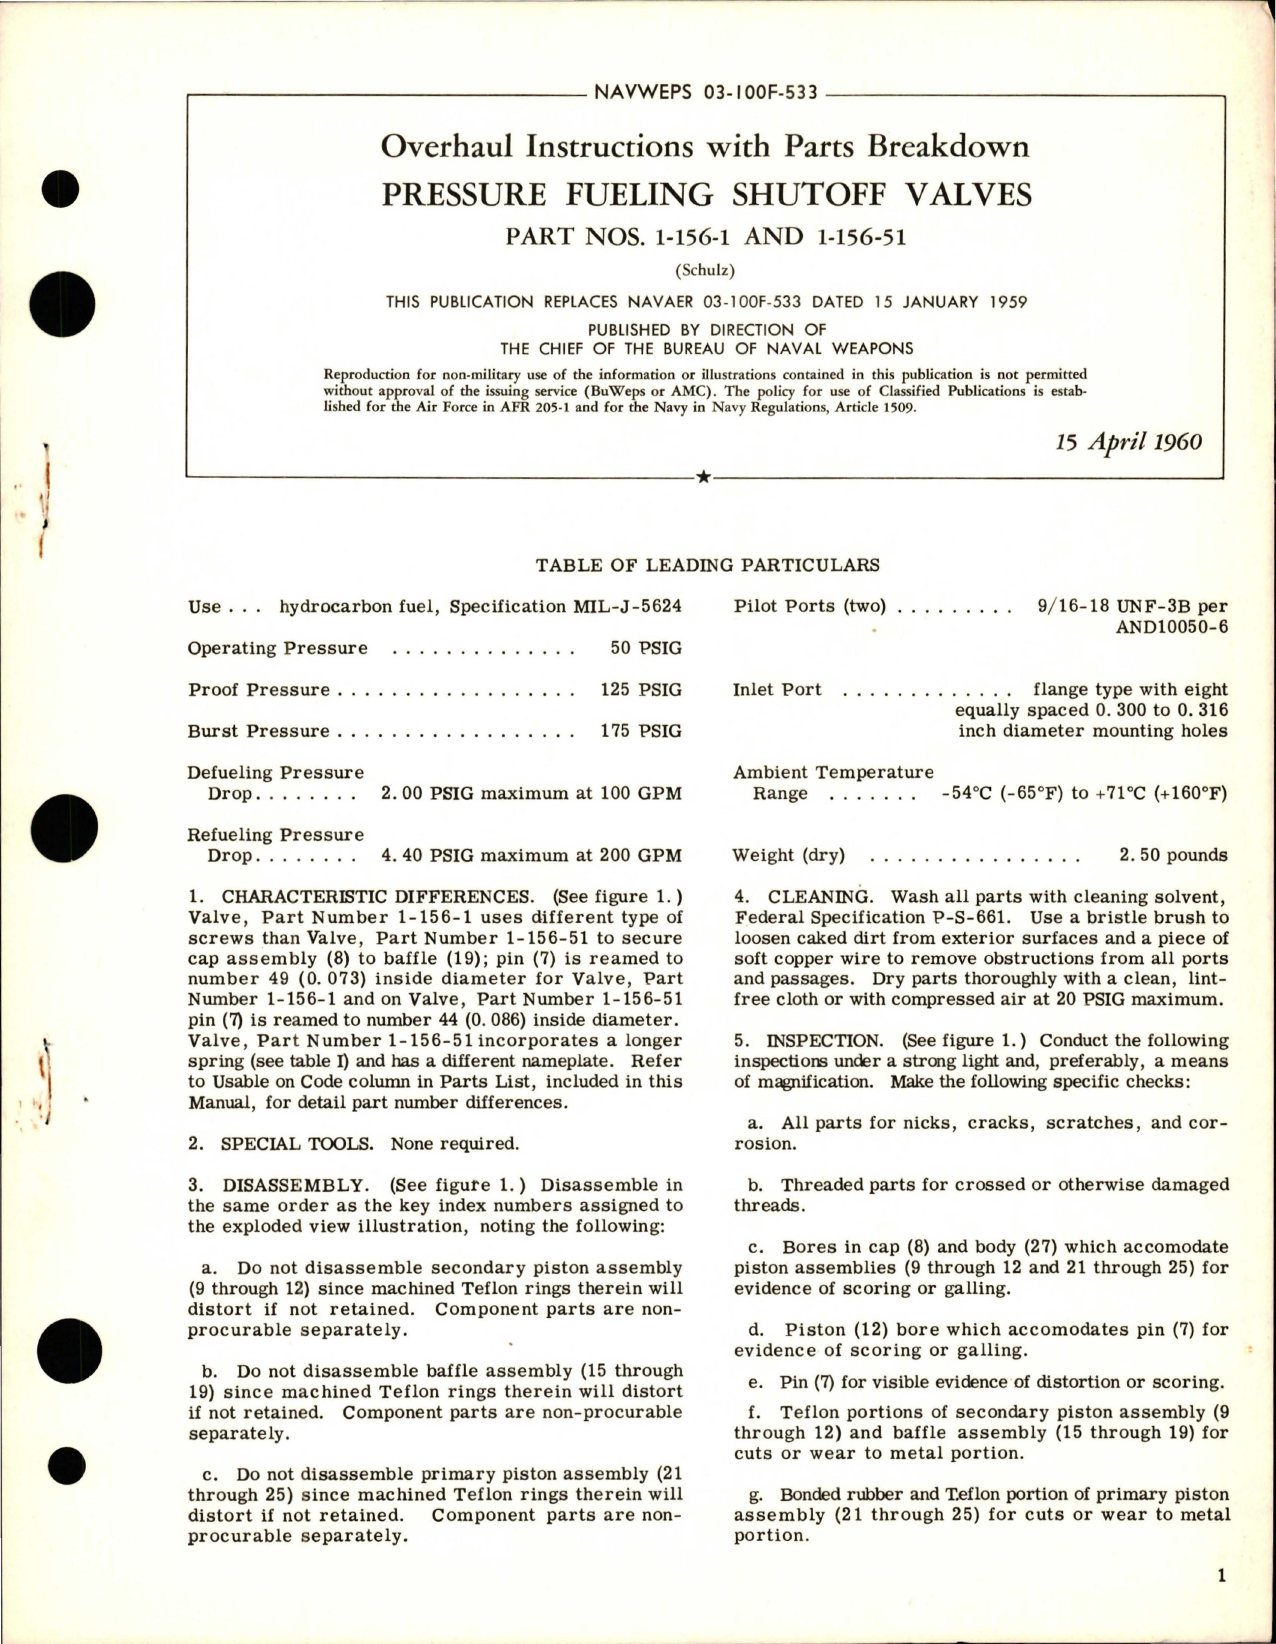 Sample page 1 from AirCorps Library document: Overhaul Instructions with Parts Breakdown for Pressure Fueling Shutoff Valves - Parts 1-156-1 and 1-156-51 